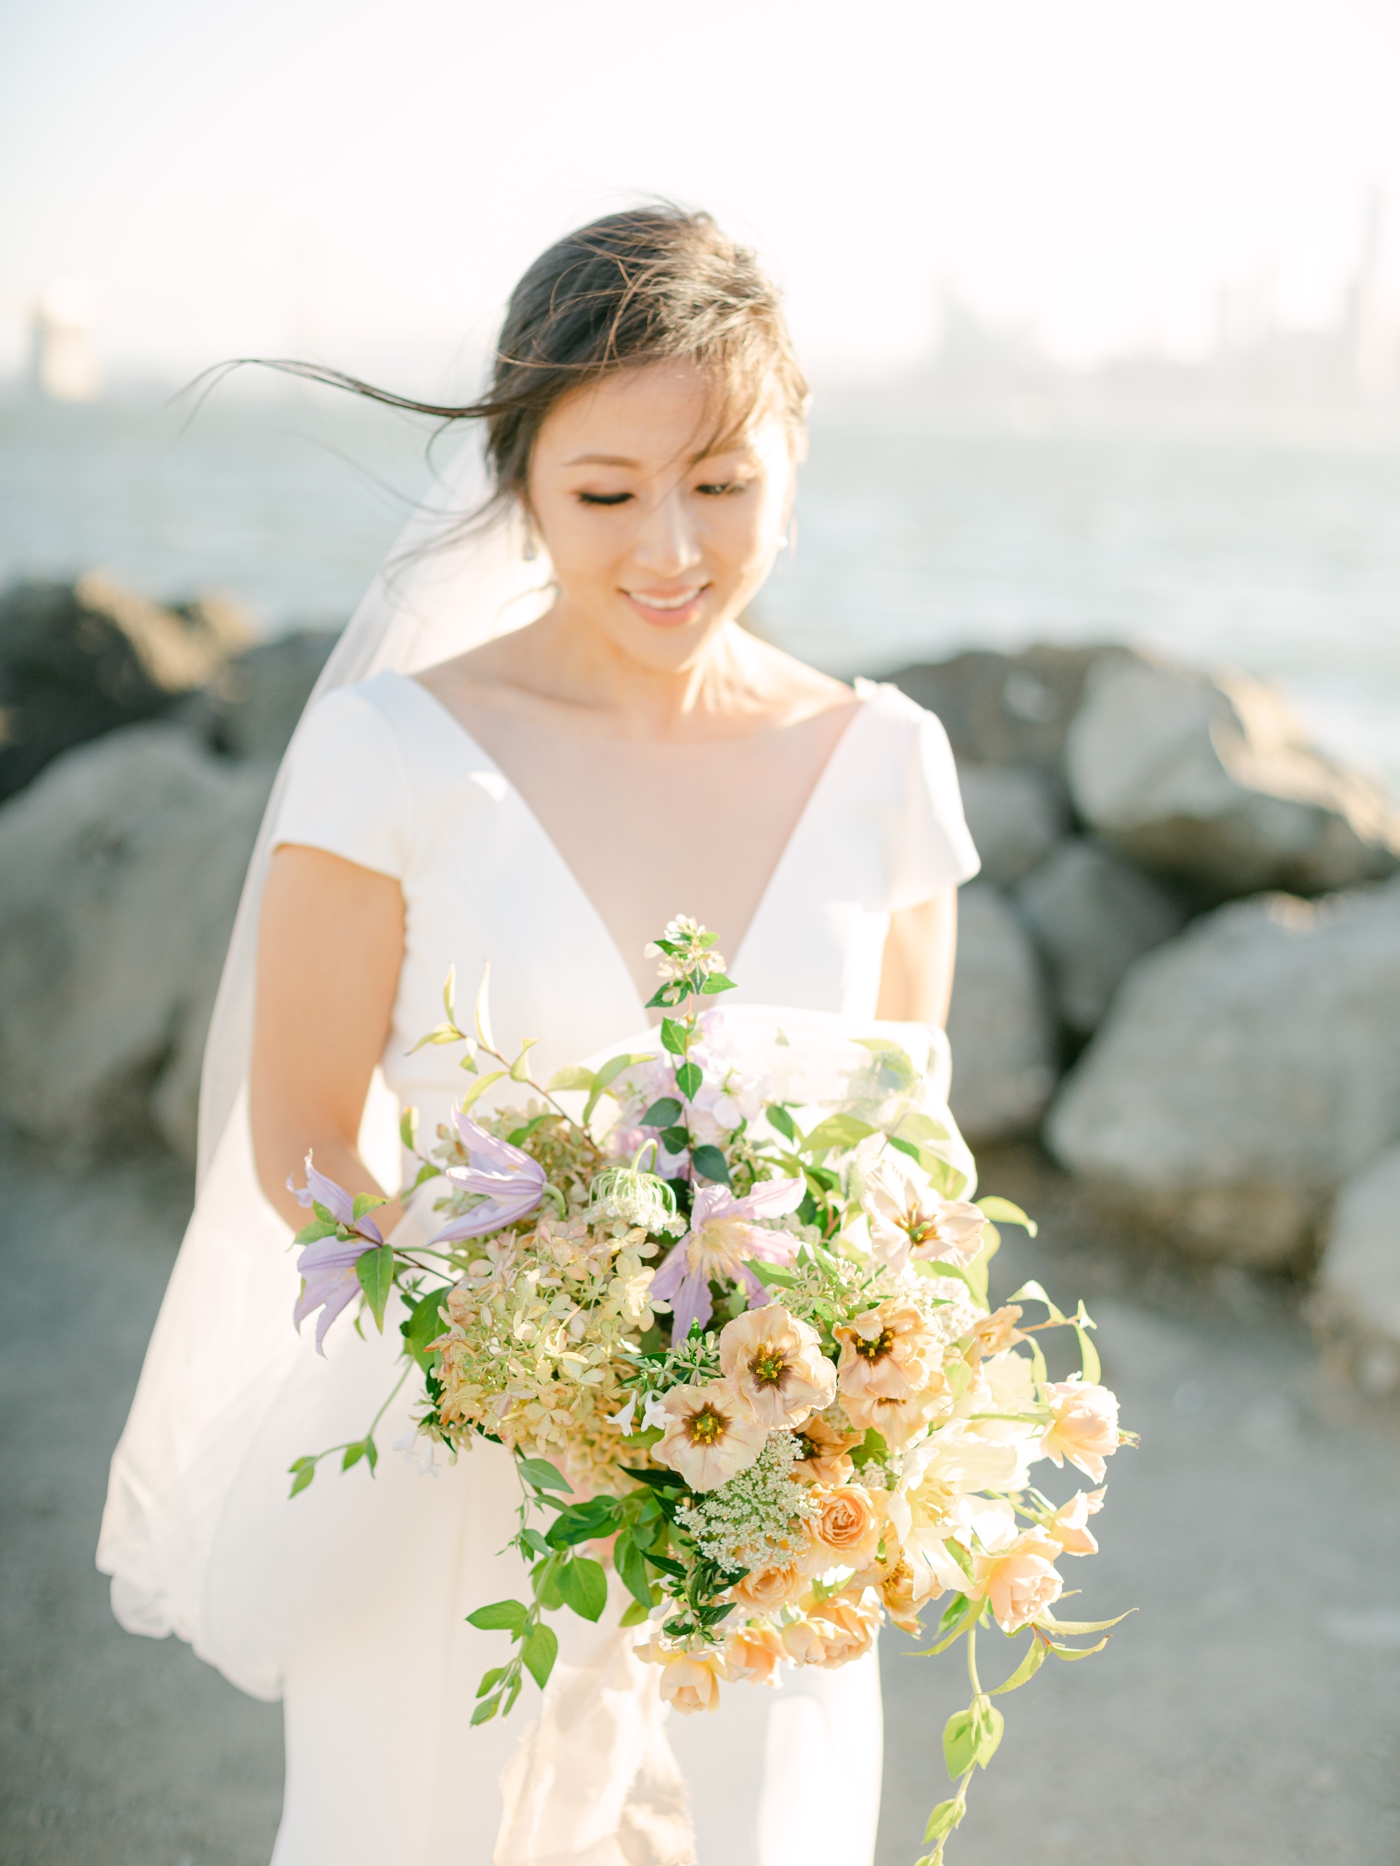 Bridal bouquet filled with garden roses, peach lisianthus, and greenery by Bough and Twig